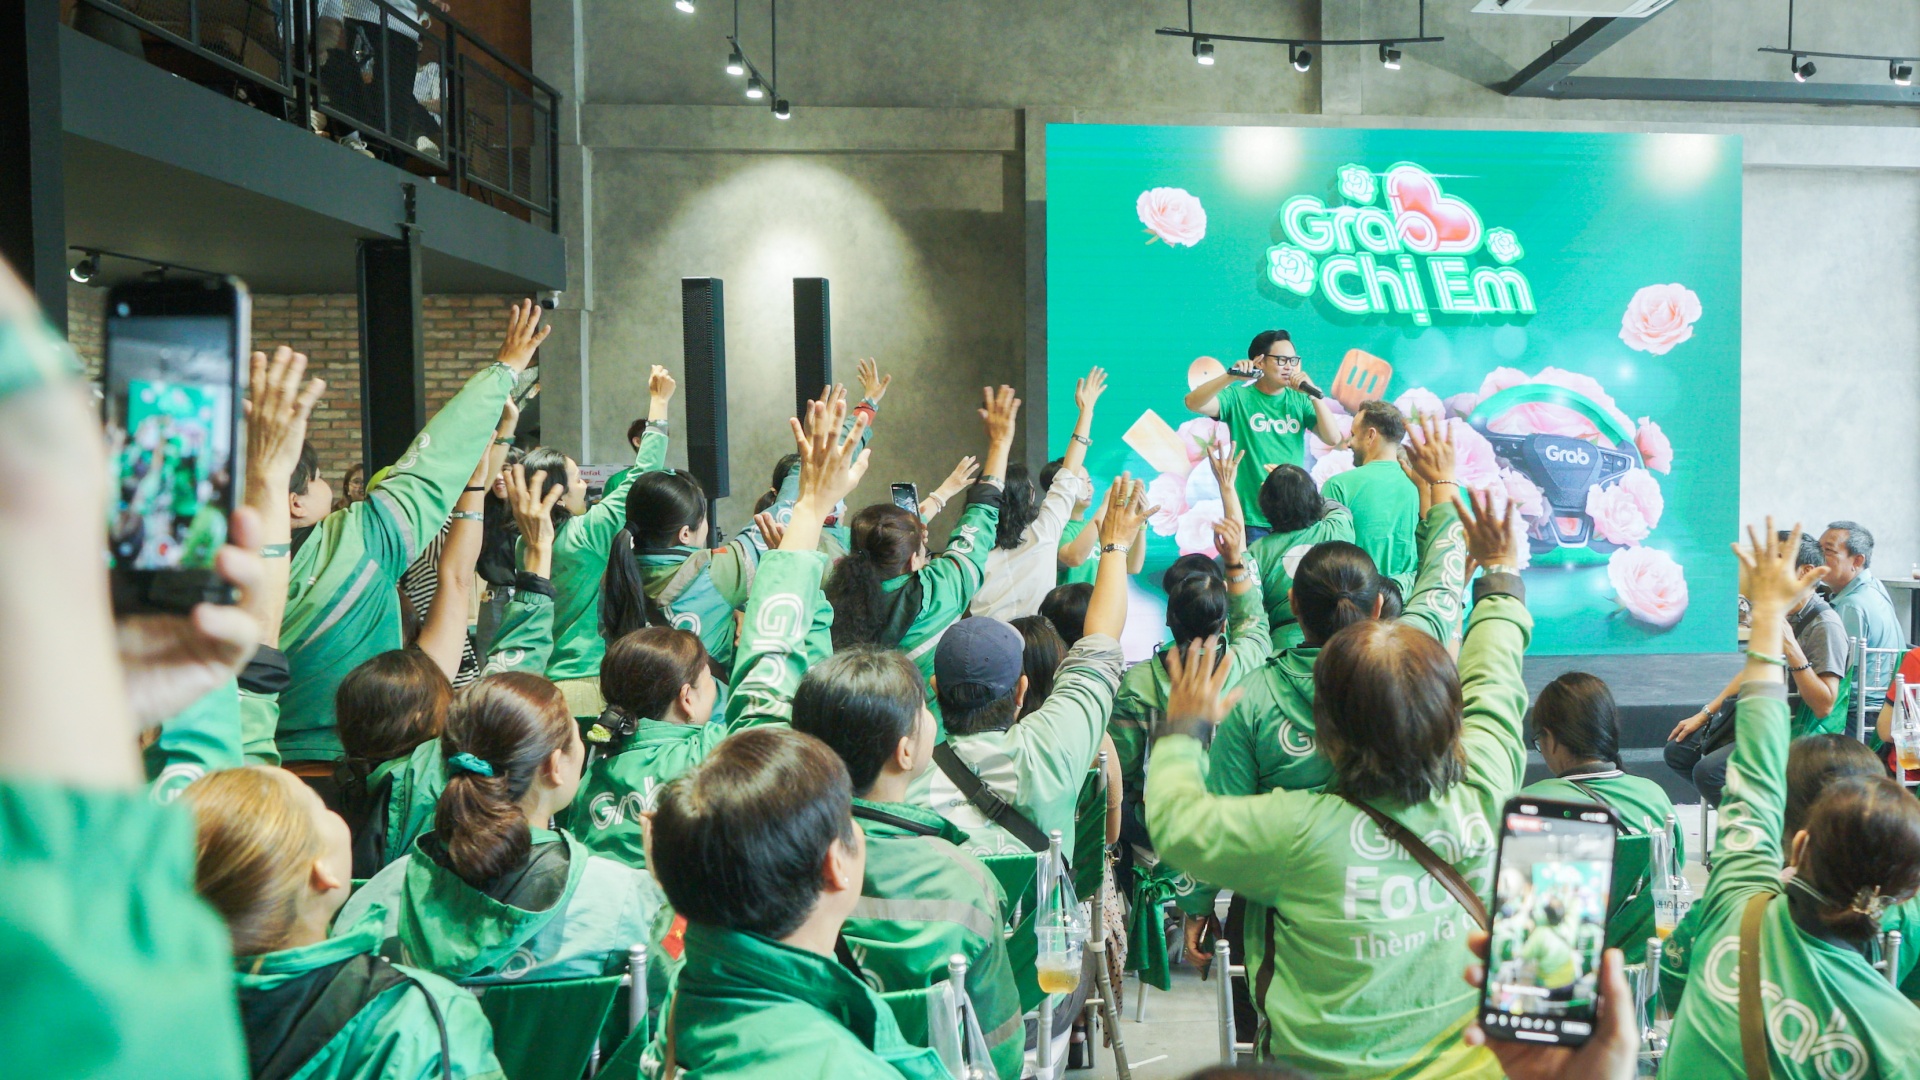 Grab introduces Women Programme for driver-partners